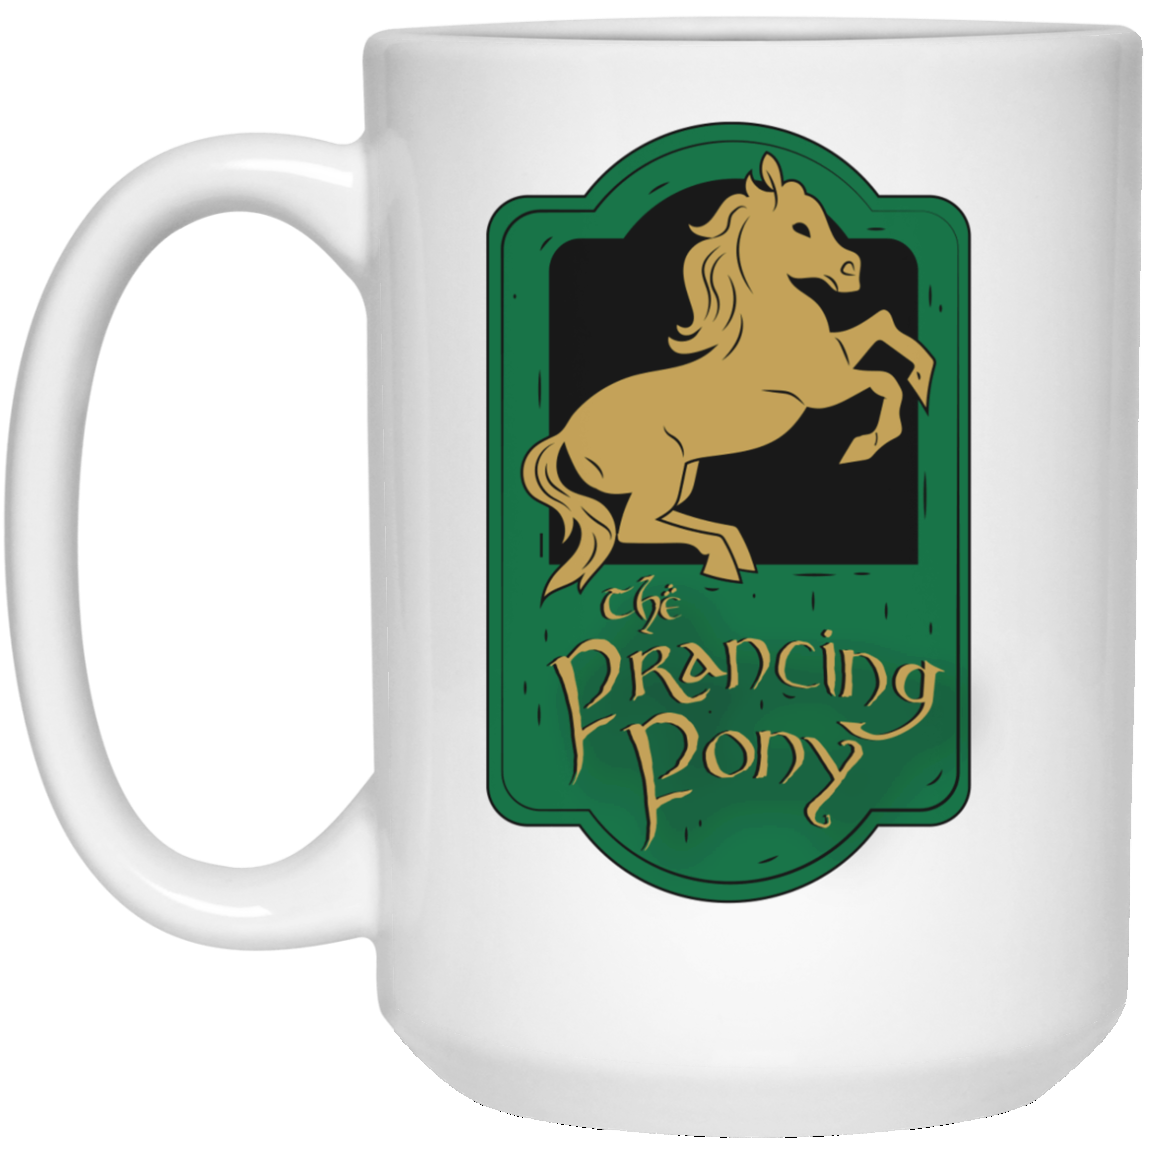 Lord of the Rings - Prancing Pony Mug - Loot Crate Exclusive - Limited  Edition